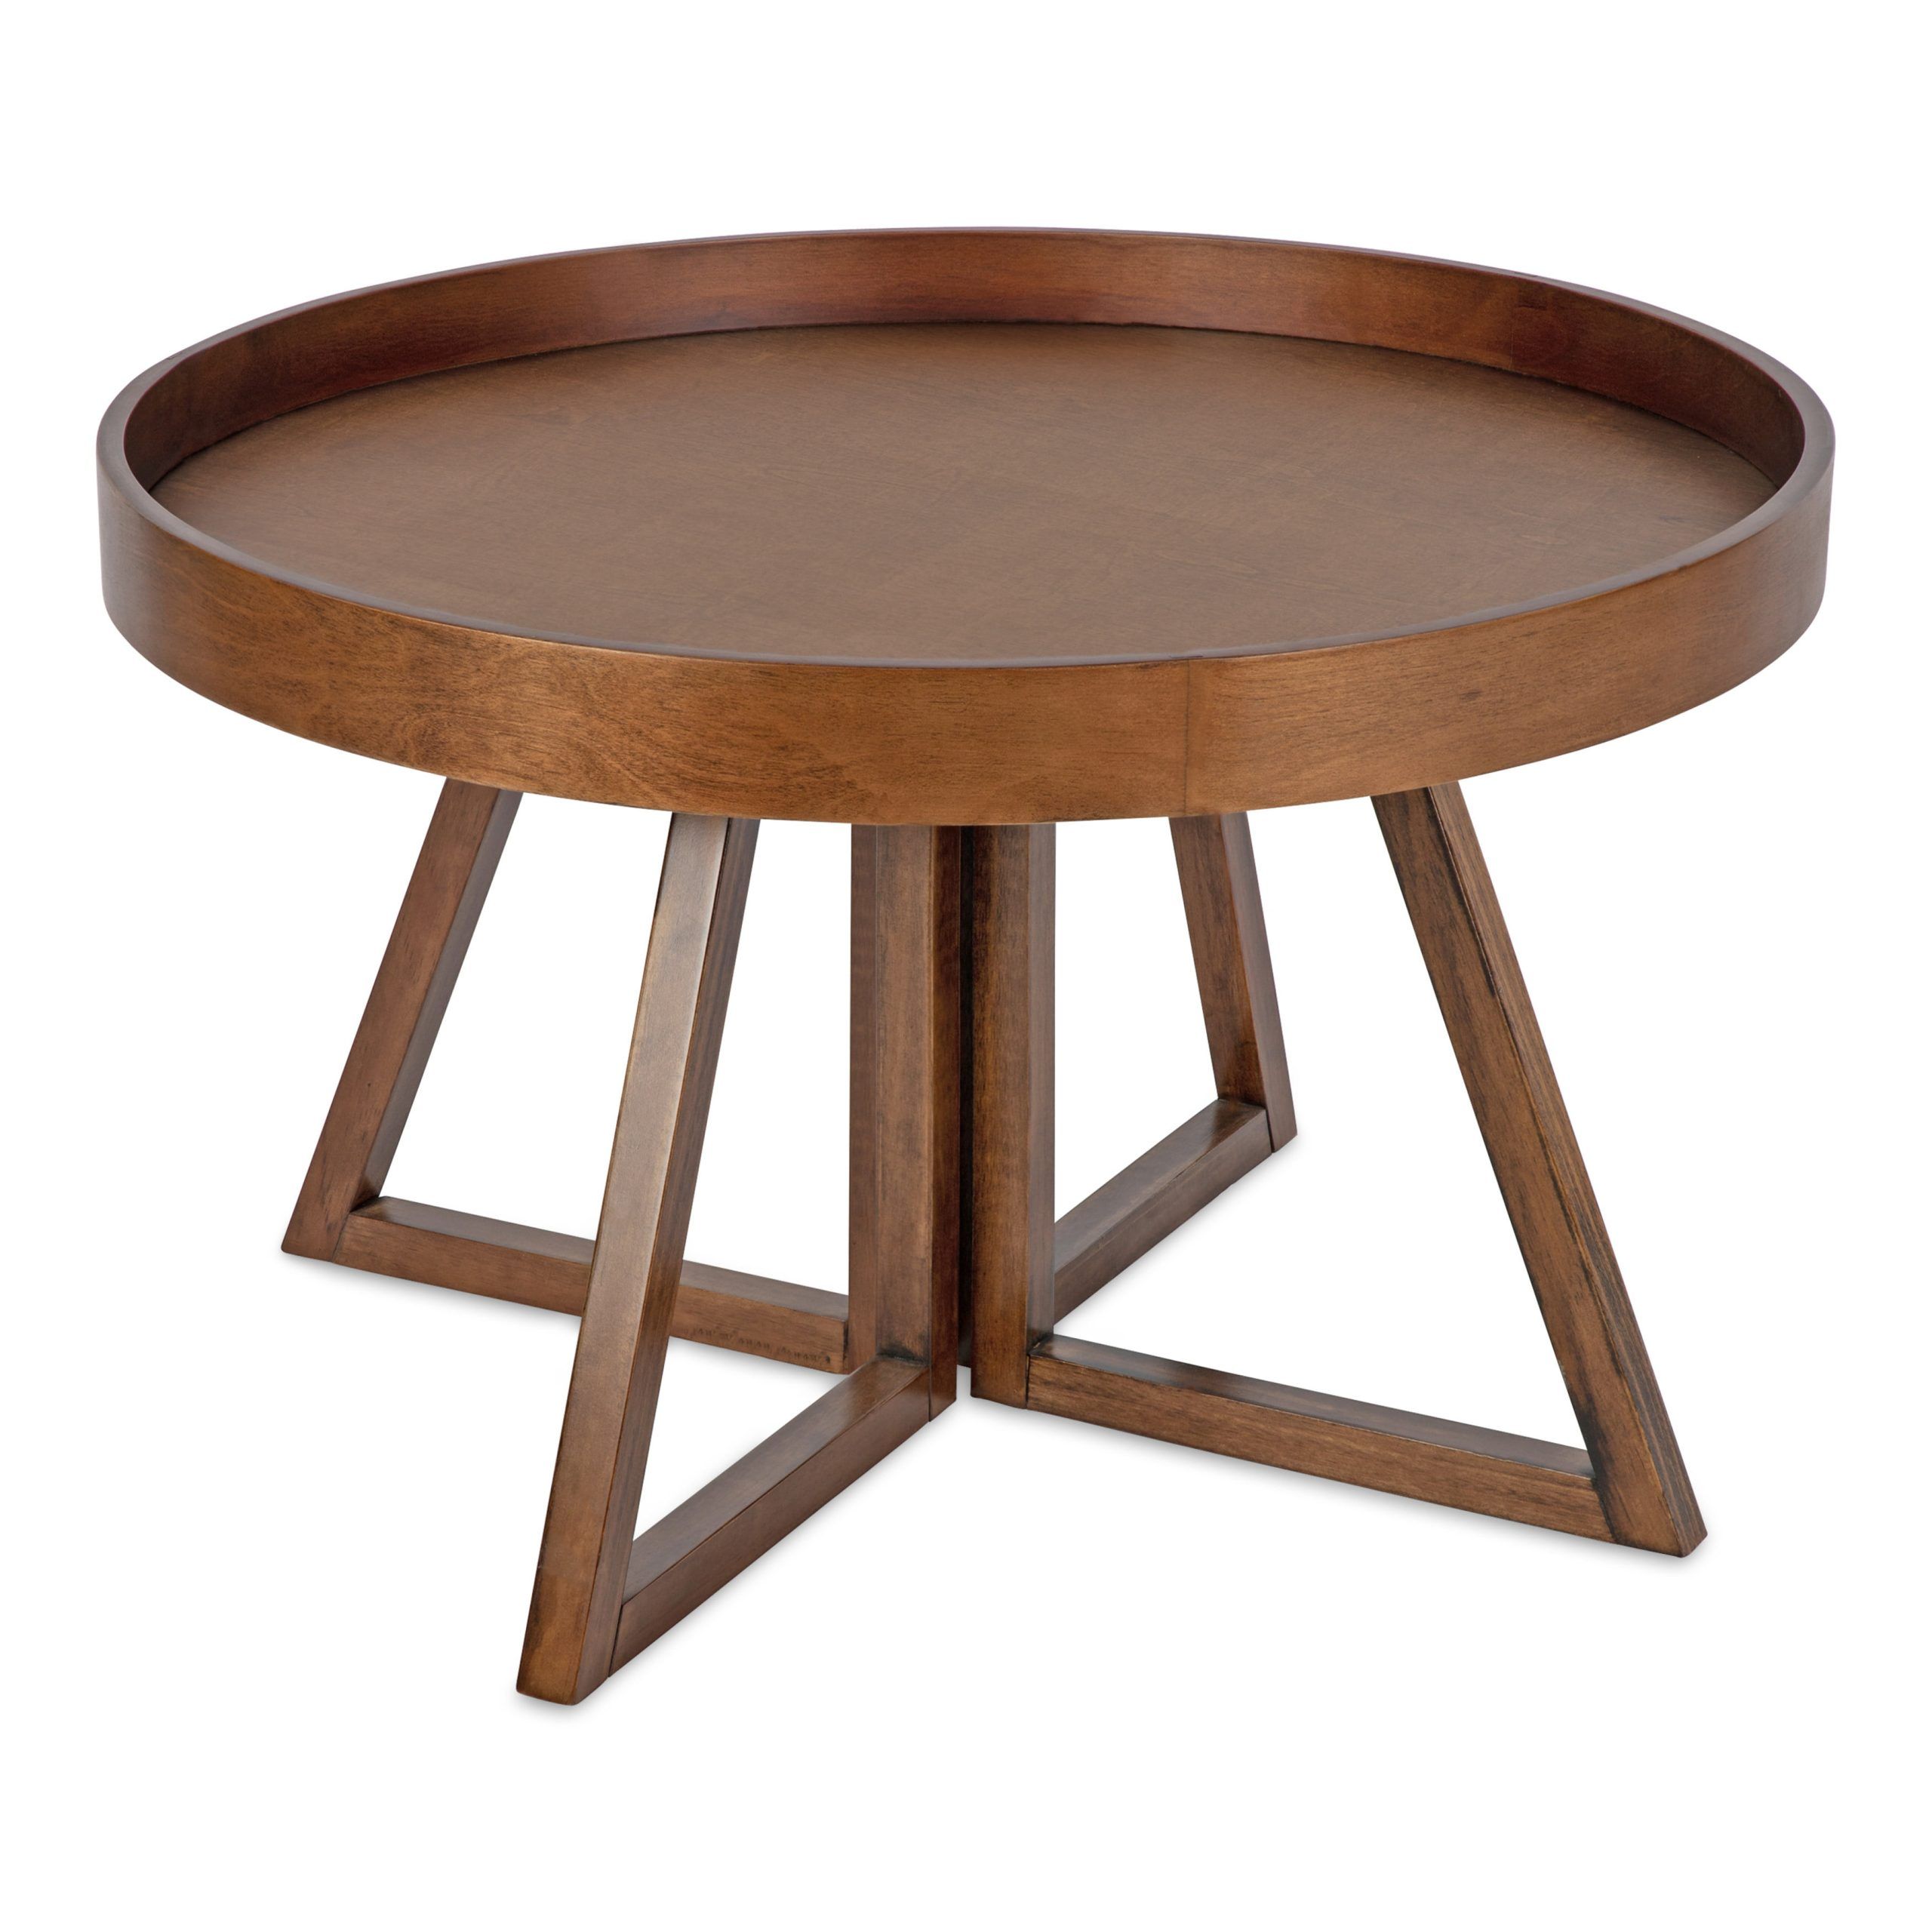 Kate And Laurel Avery Modern Round Coffee Table, 30" X 30" X 18 Intended For Coffee Tables For 4 6 People (View 6 of 20)